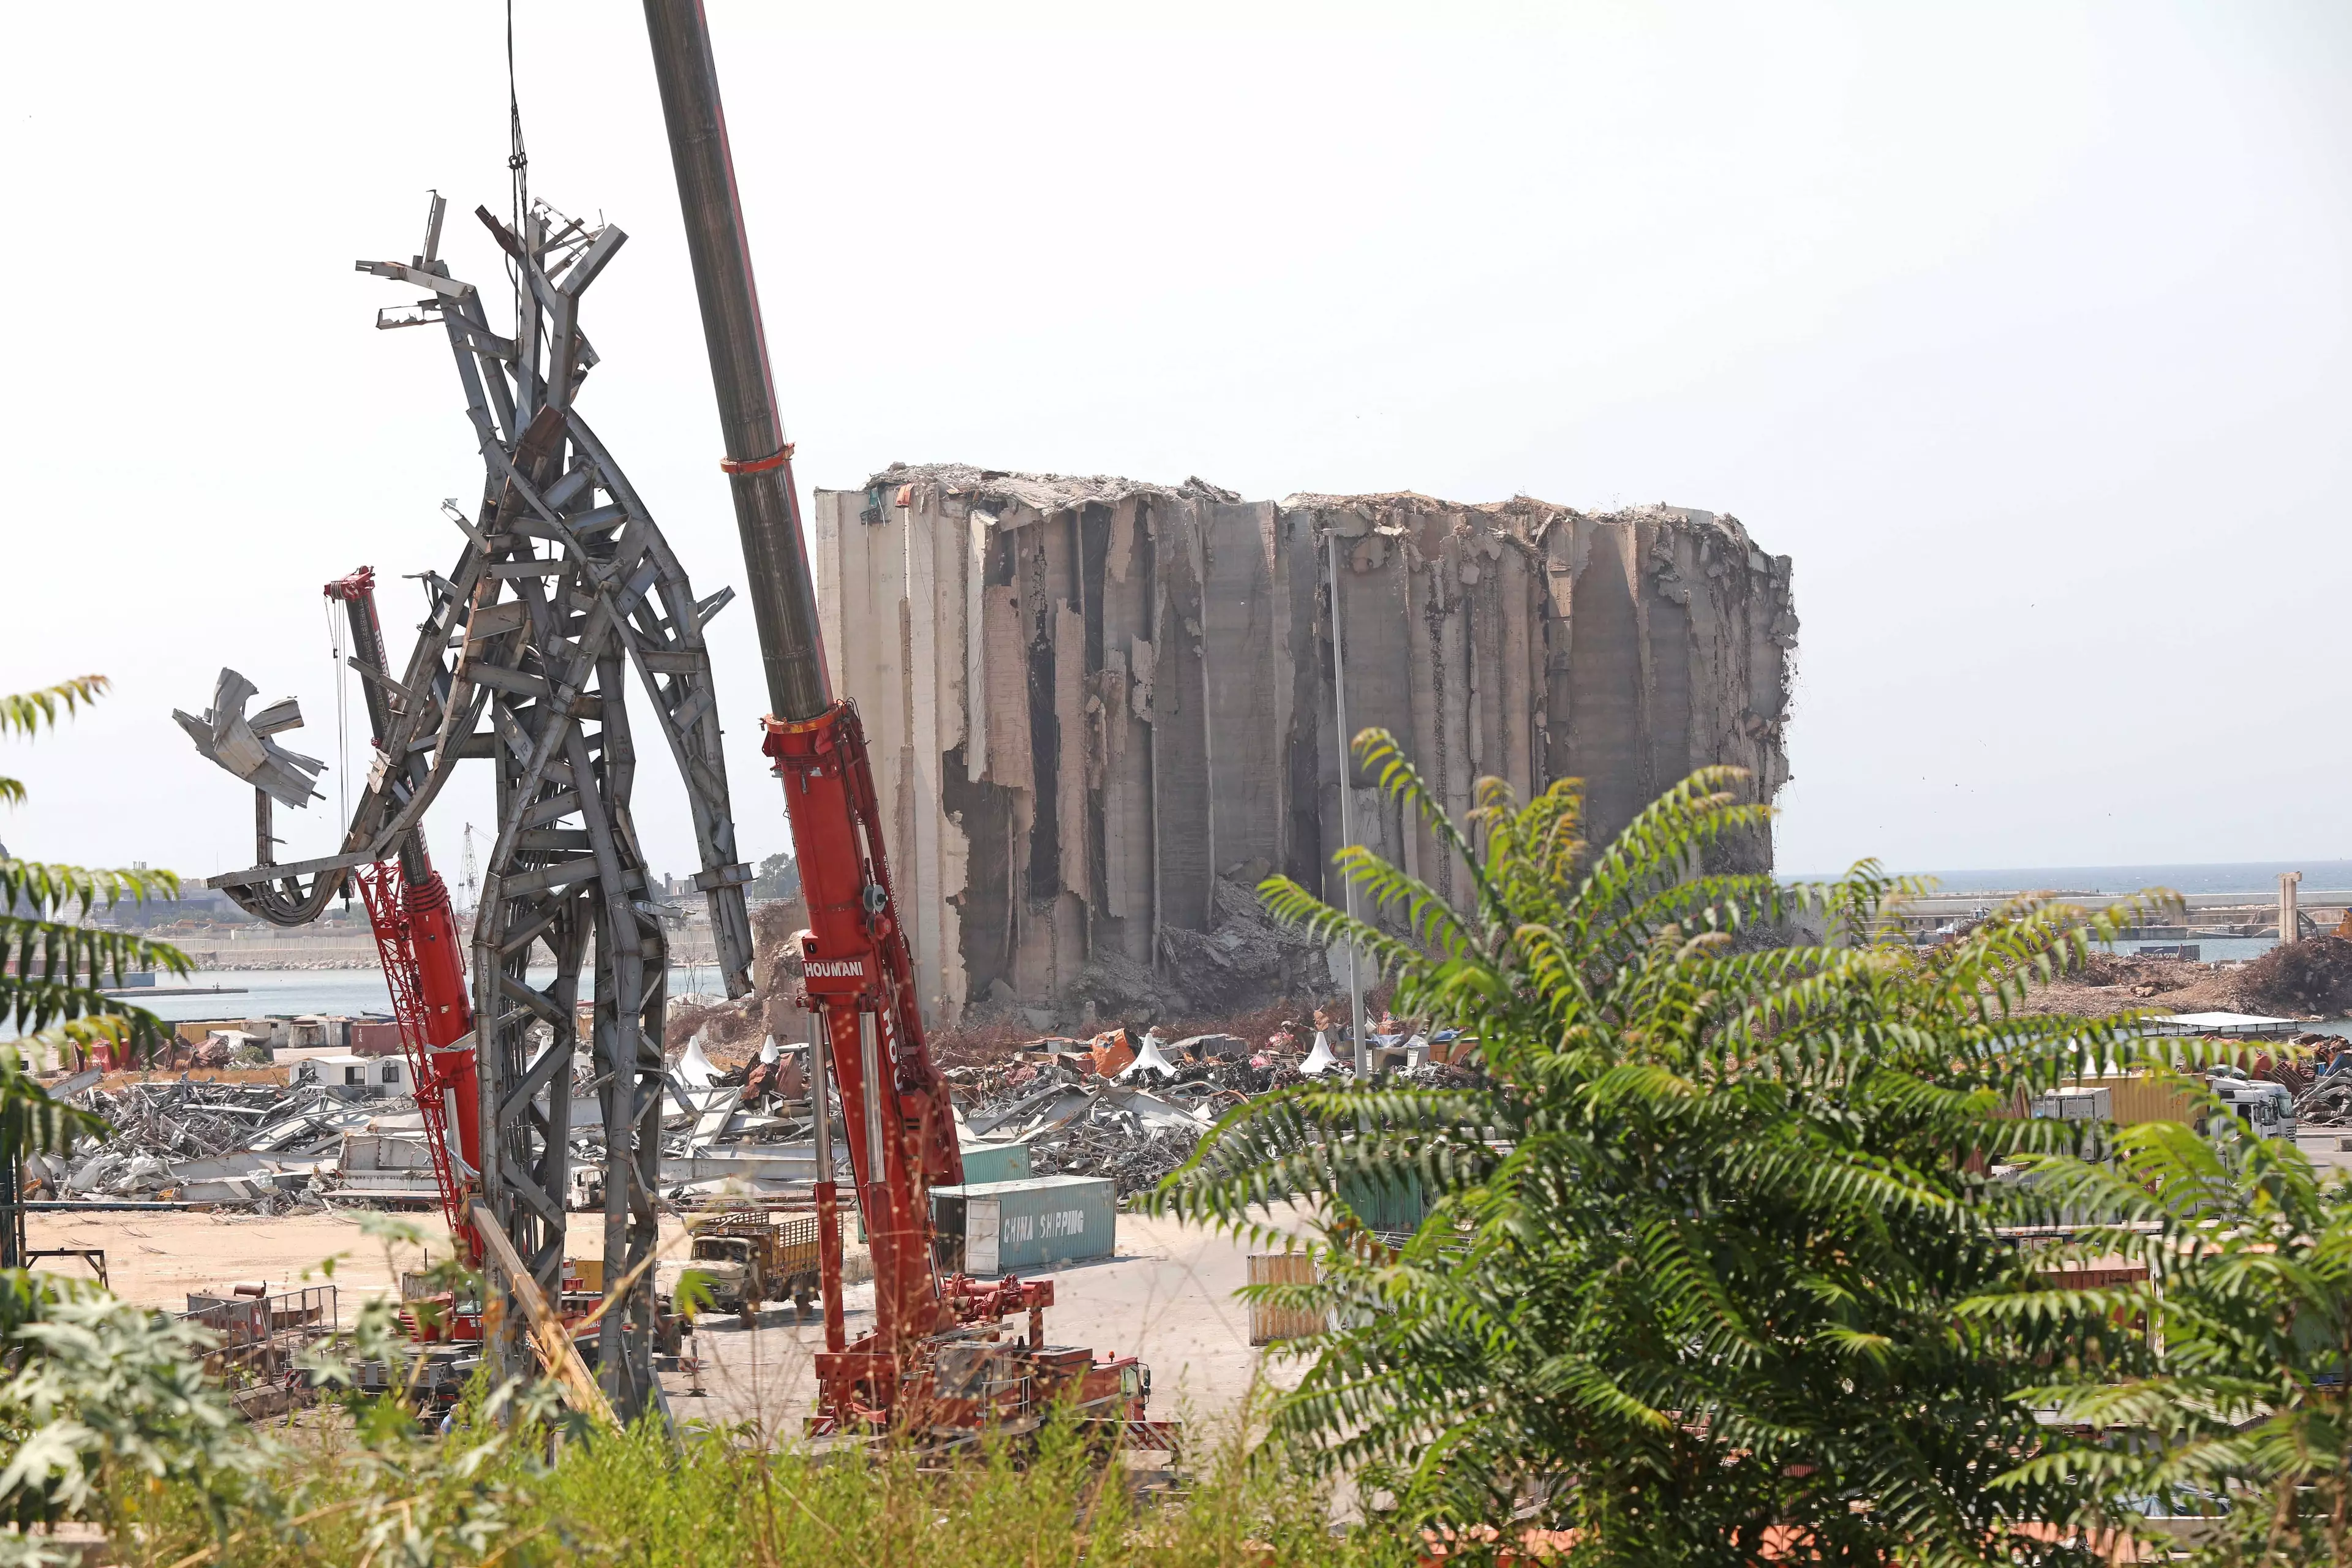 A statue named 'The Giant' made from the remains of the Beirut port's wreckage.